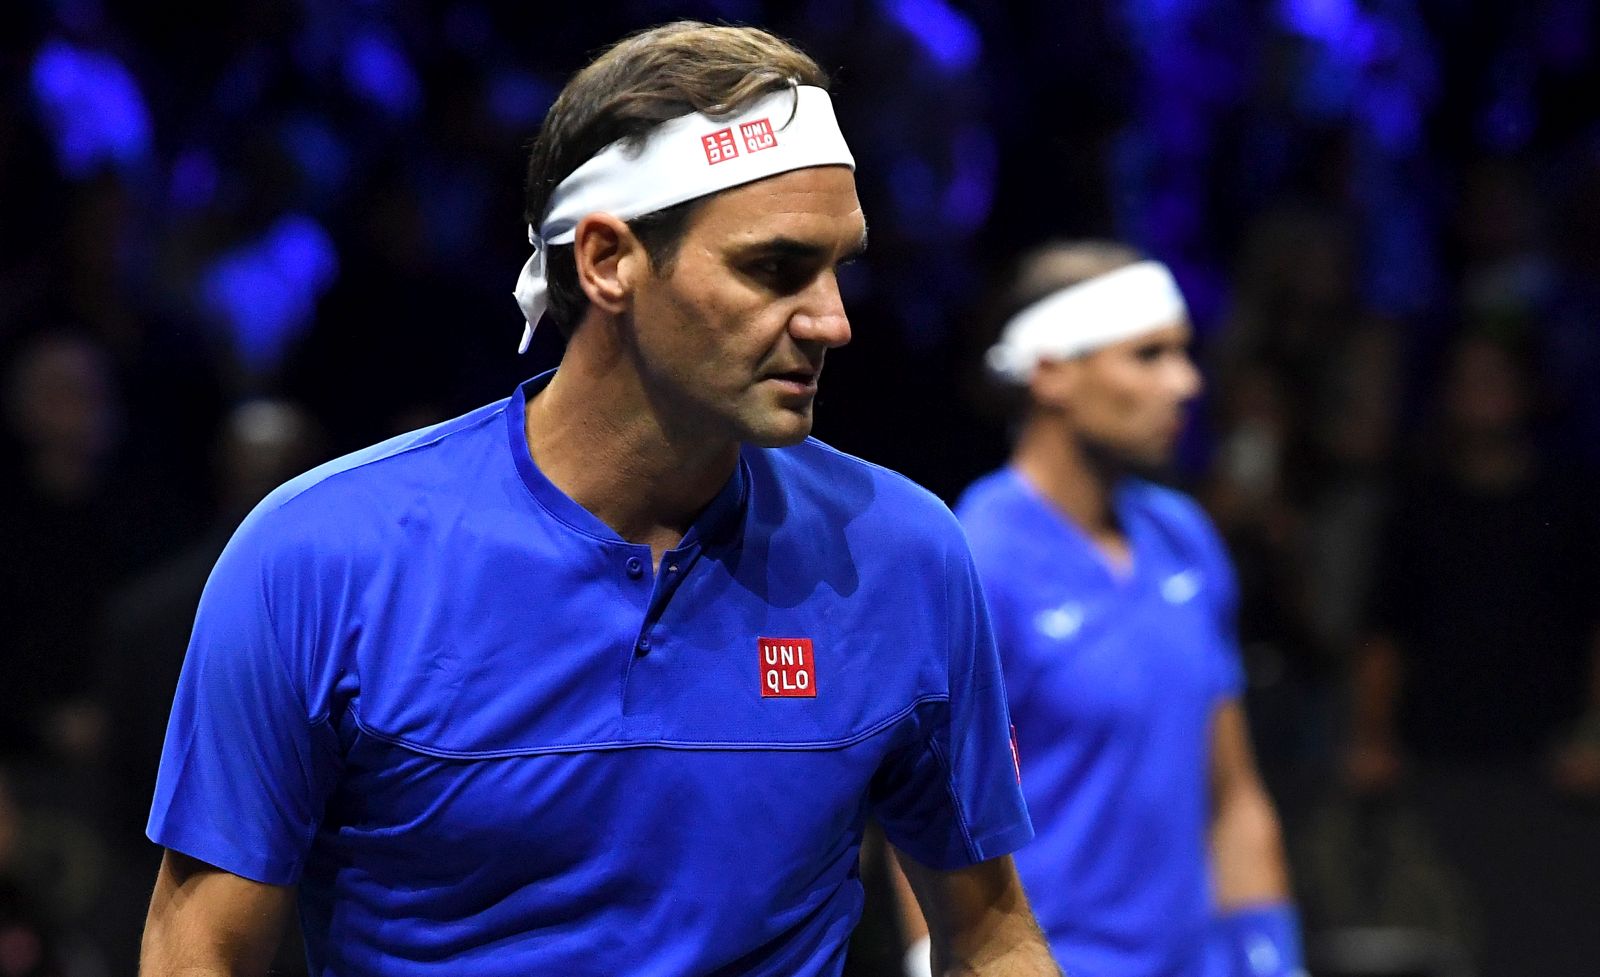 epa10202591 Team Europe double Roger Federer (foreground) of Switzerland and Rafael Nadal of Spain in their match against Team World double Jack Sock of the US and Frances Tiafoe of the US on the first day of the Laver Cup tennis tournament in London, Britain, 23 September 2022.  EPA/ANDY RAIN